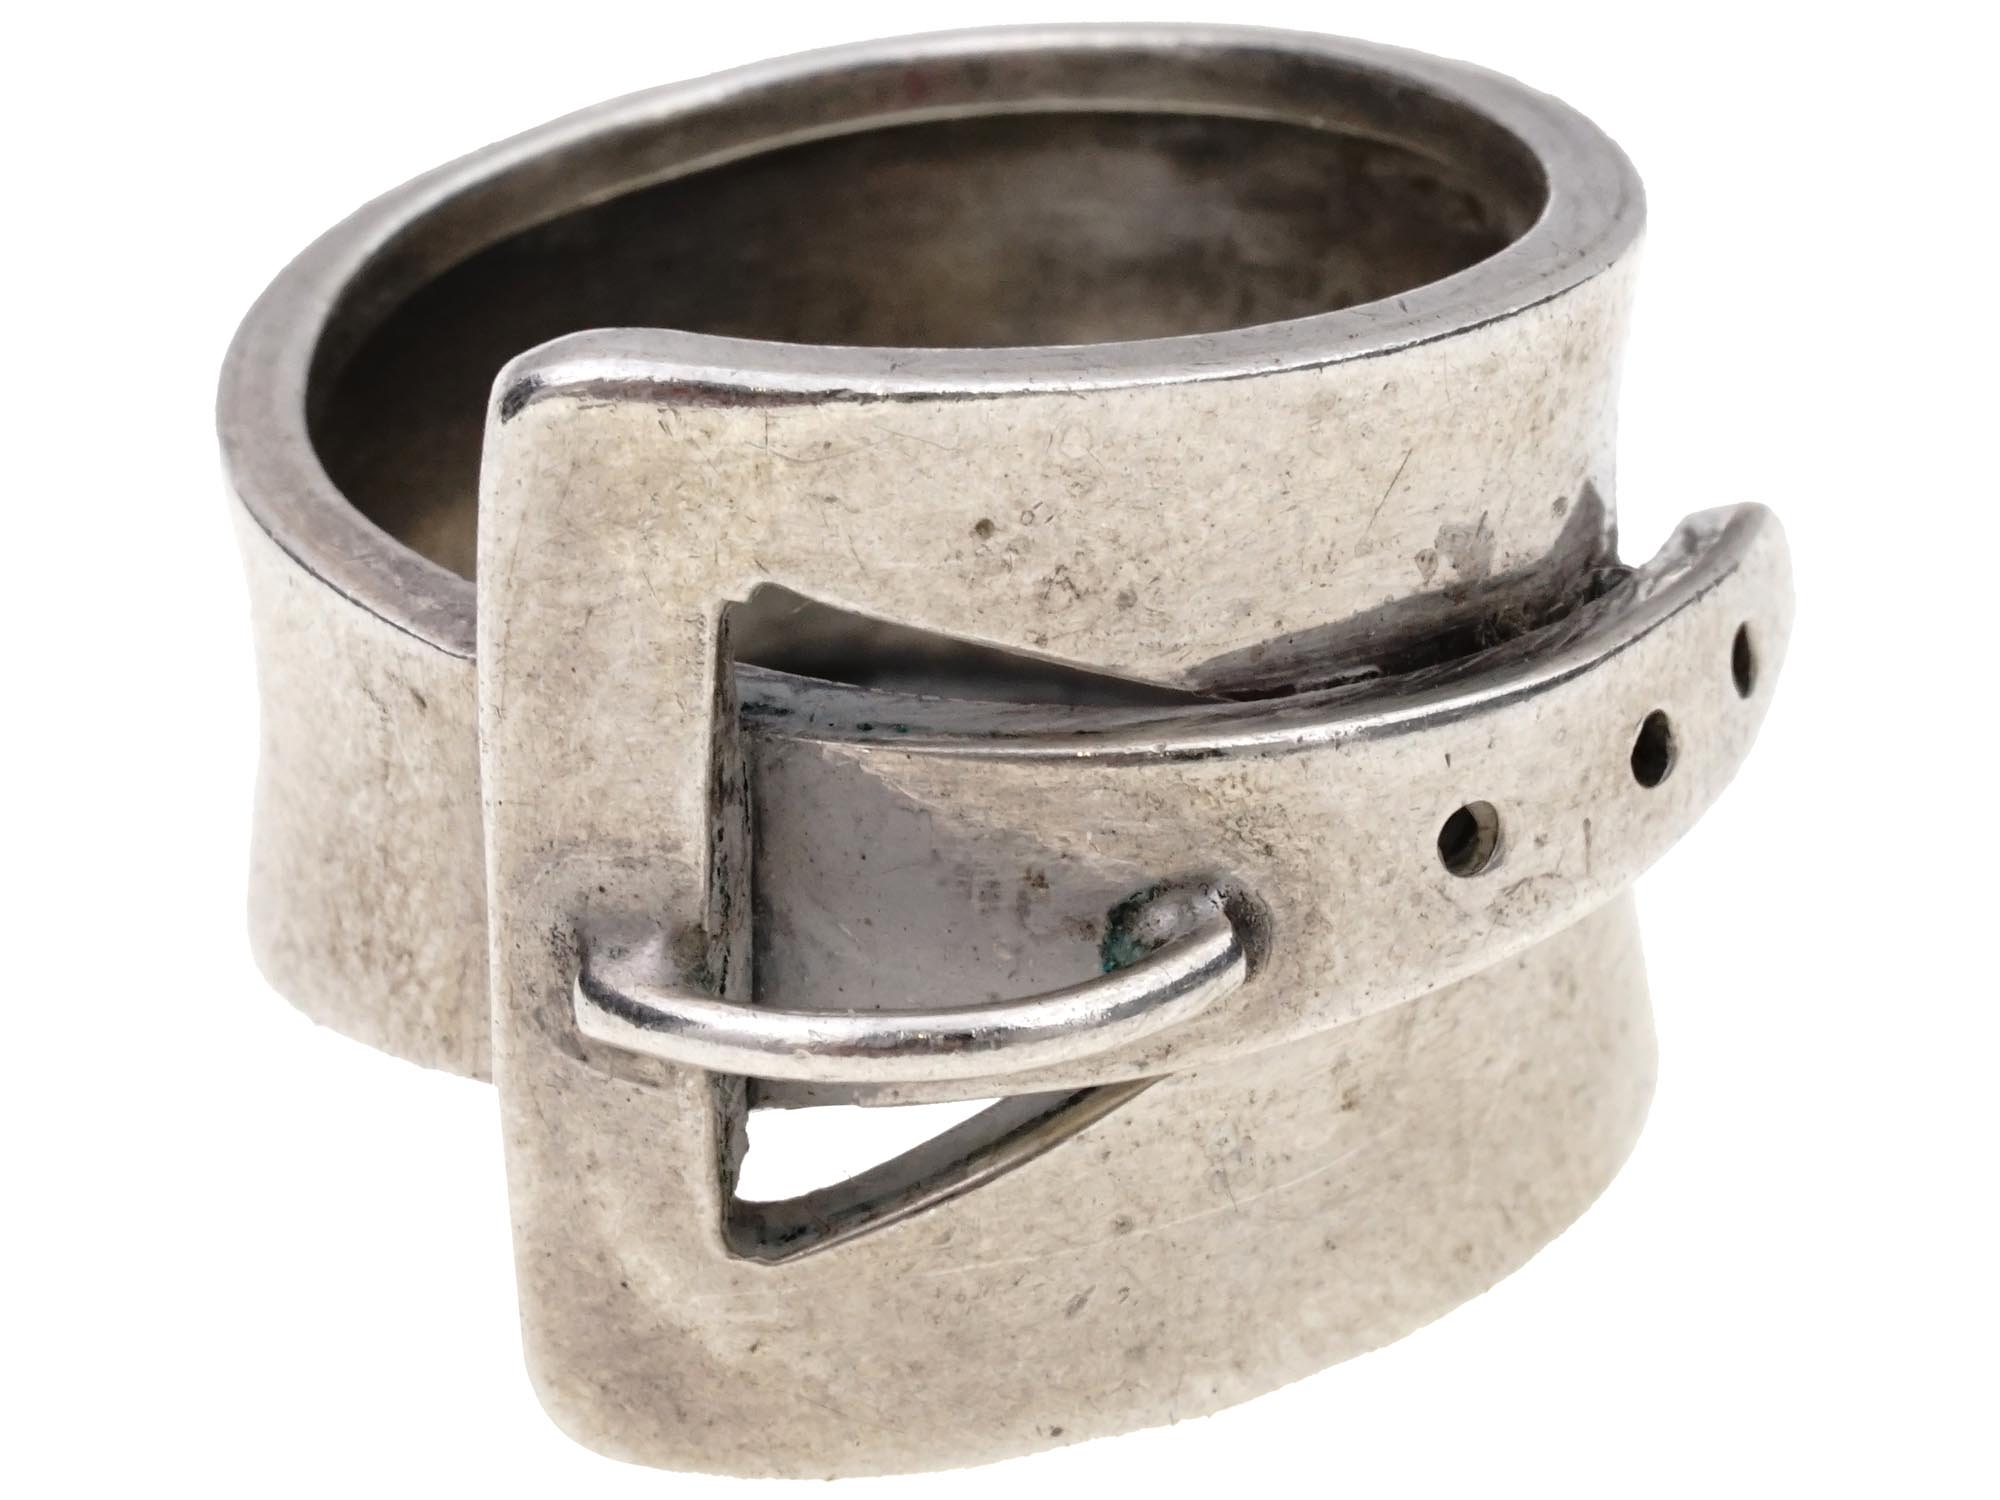 GUCCI ITALY STERLING SILVER WIDE BAND BUCKLE RING PIC-0